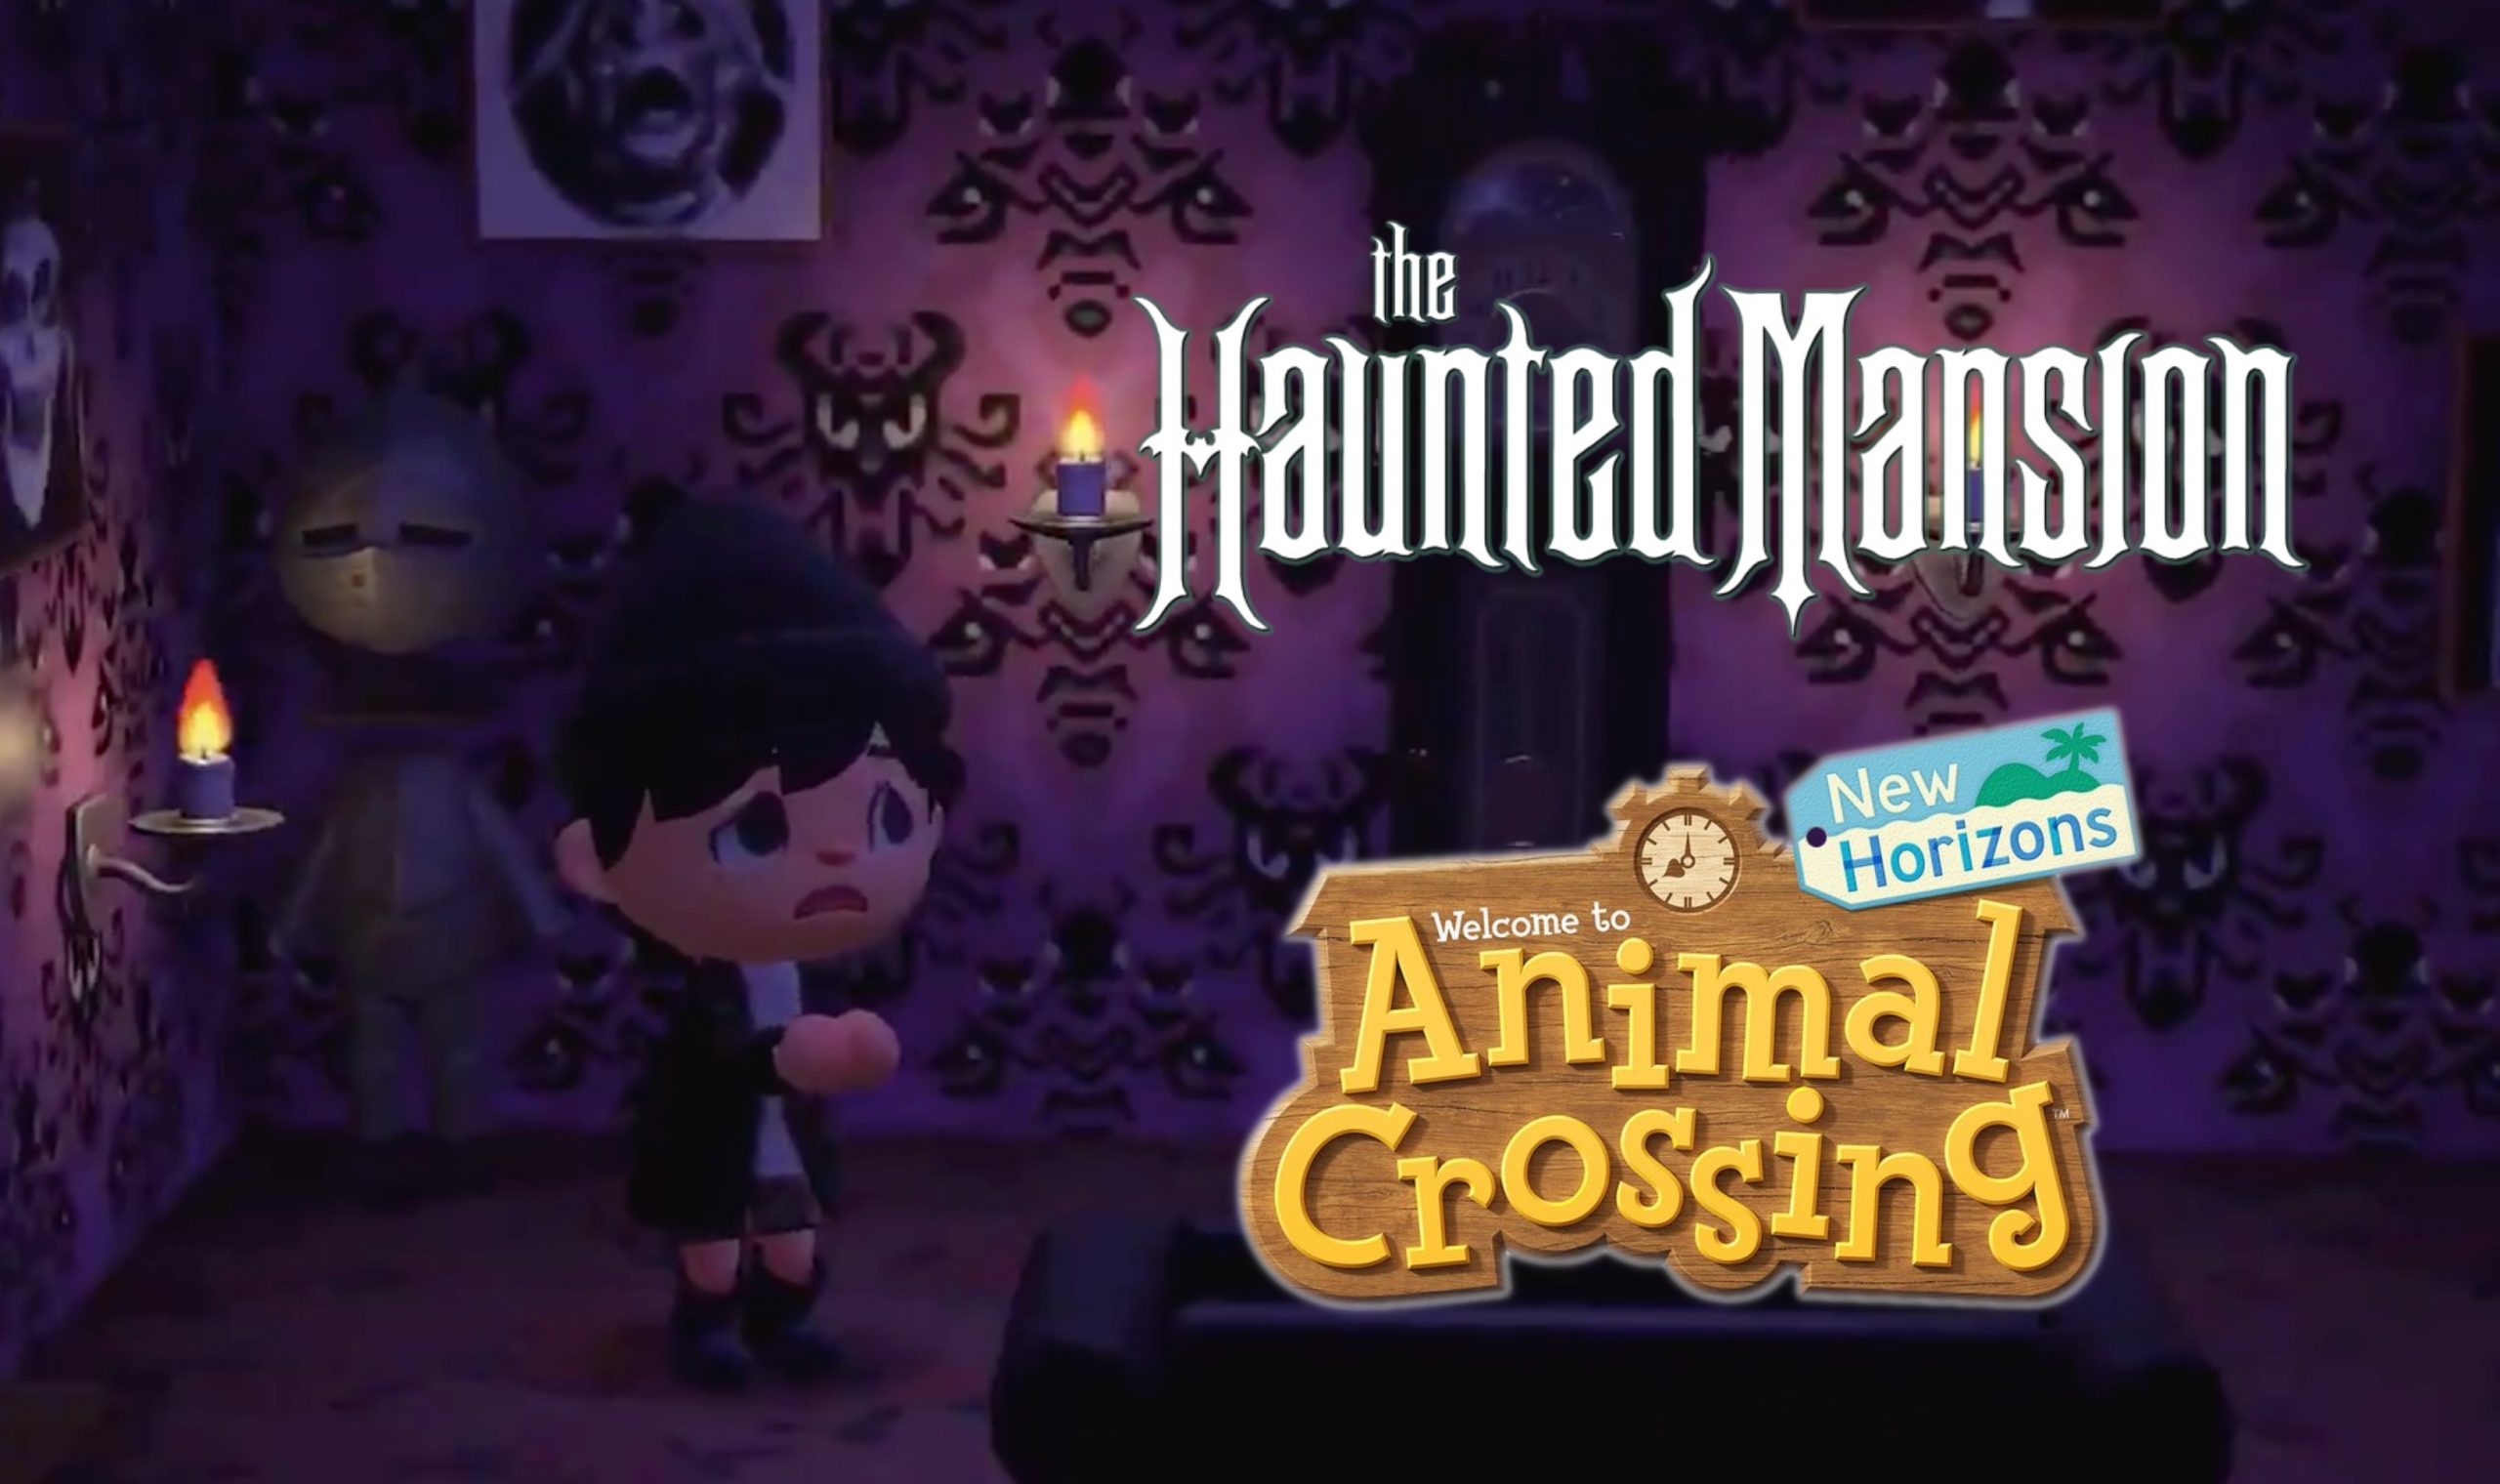 Super Fan Recreated The Haunted Mansion in ‘Animal Crossing: New Horizons’